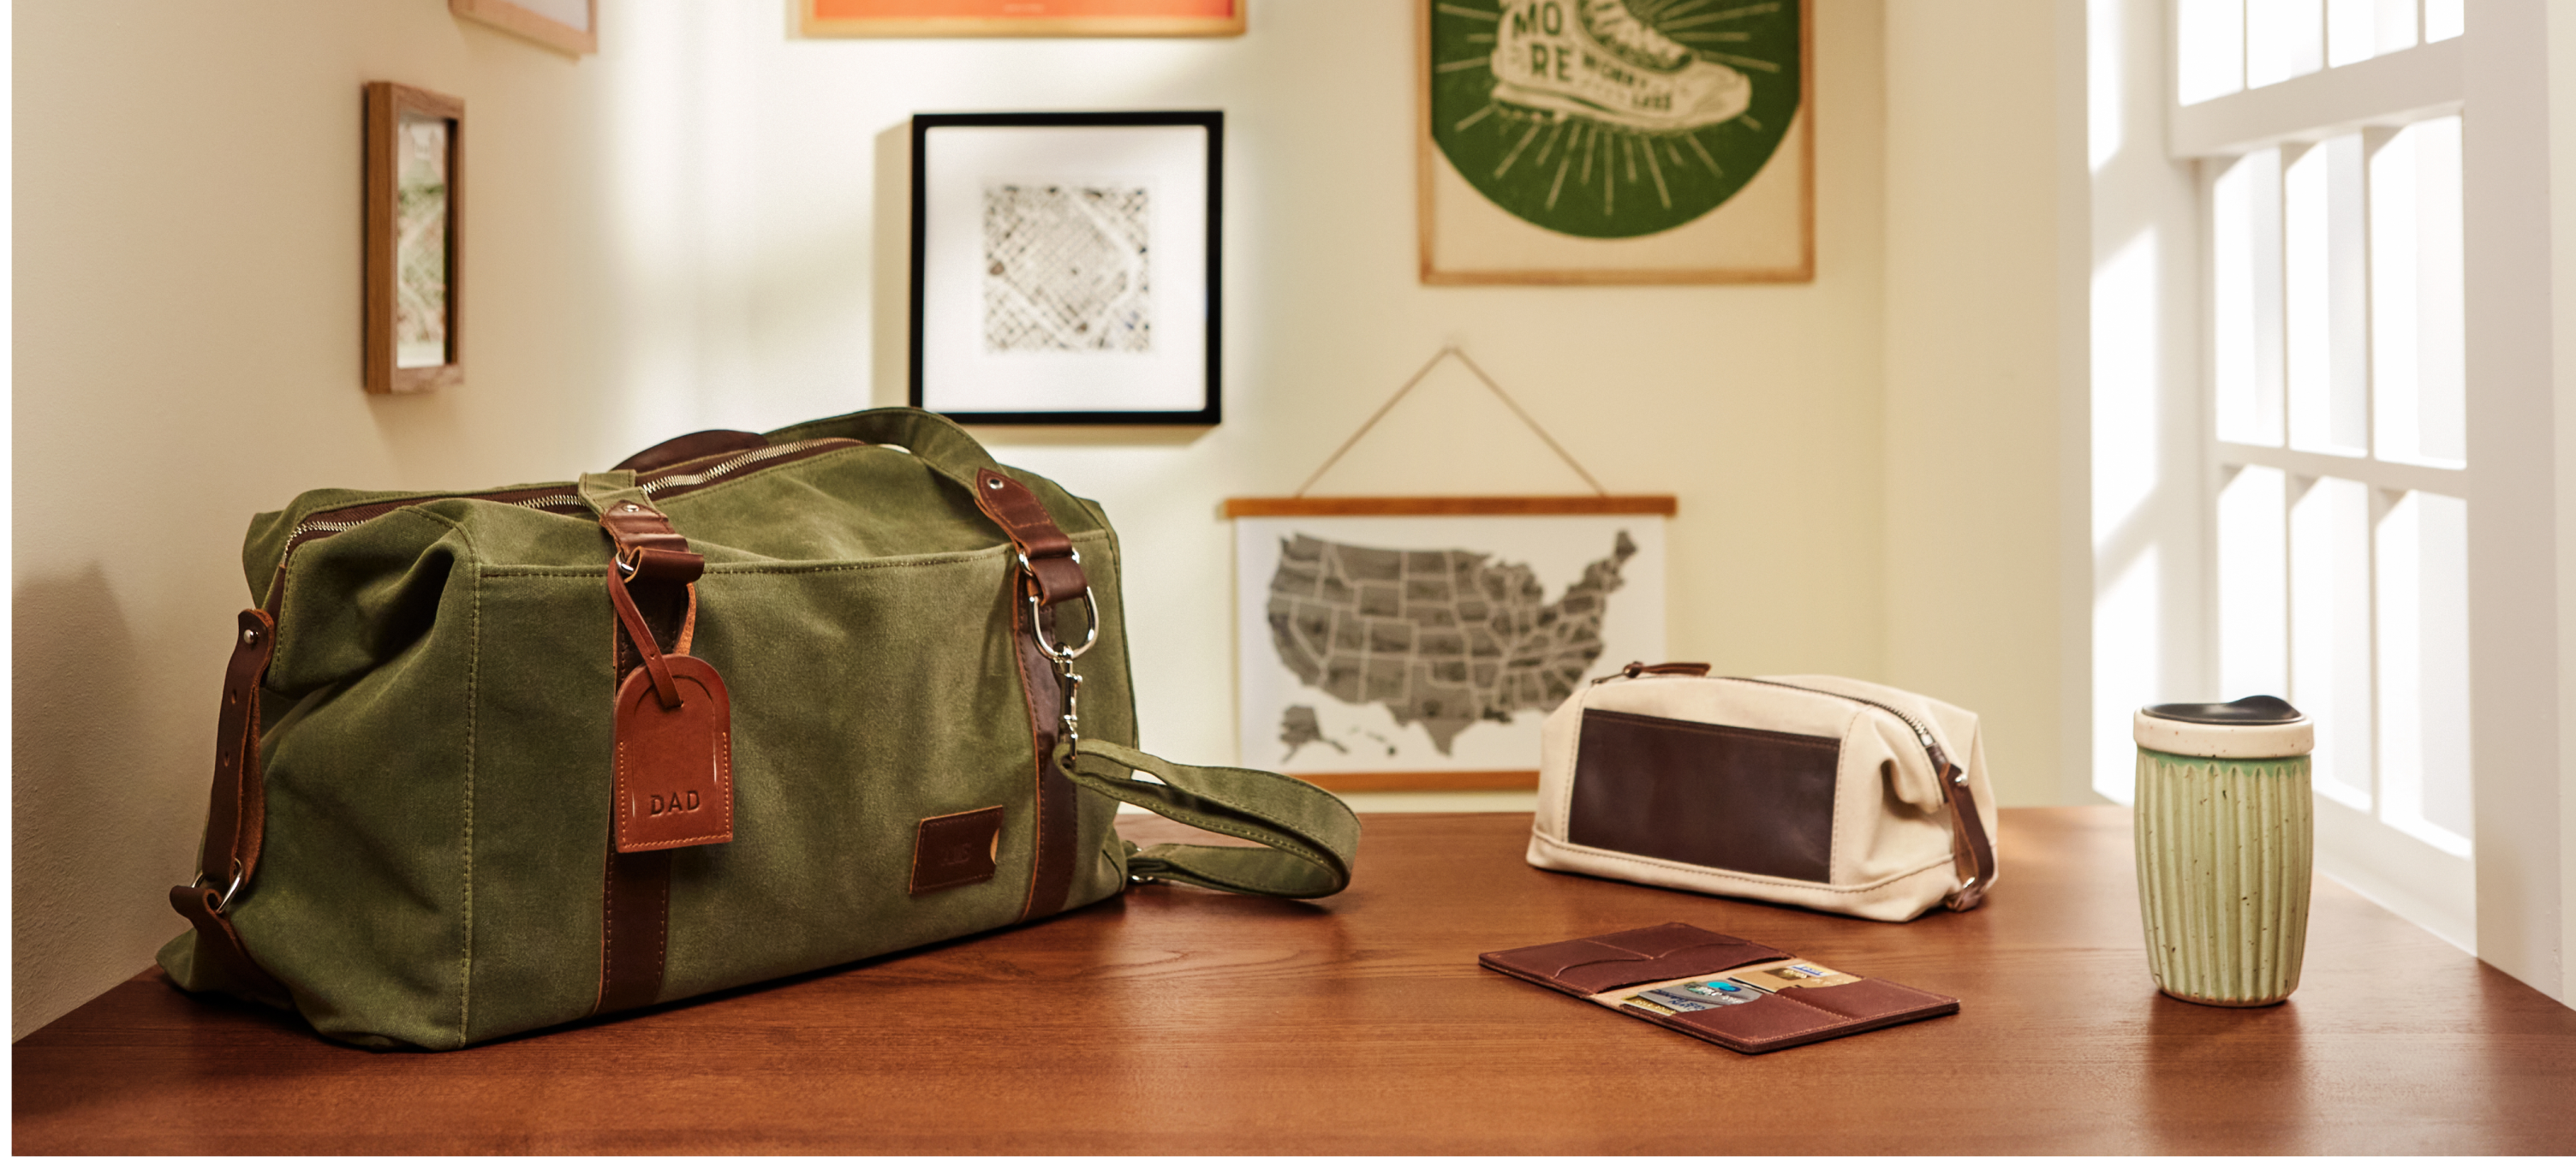 A green duffle bag, a brown leather wallet, and a white canvas bag on a wooden table